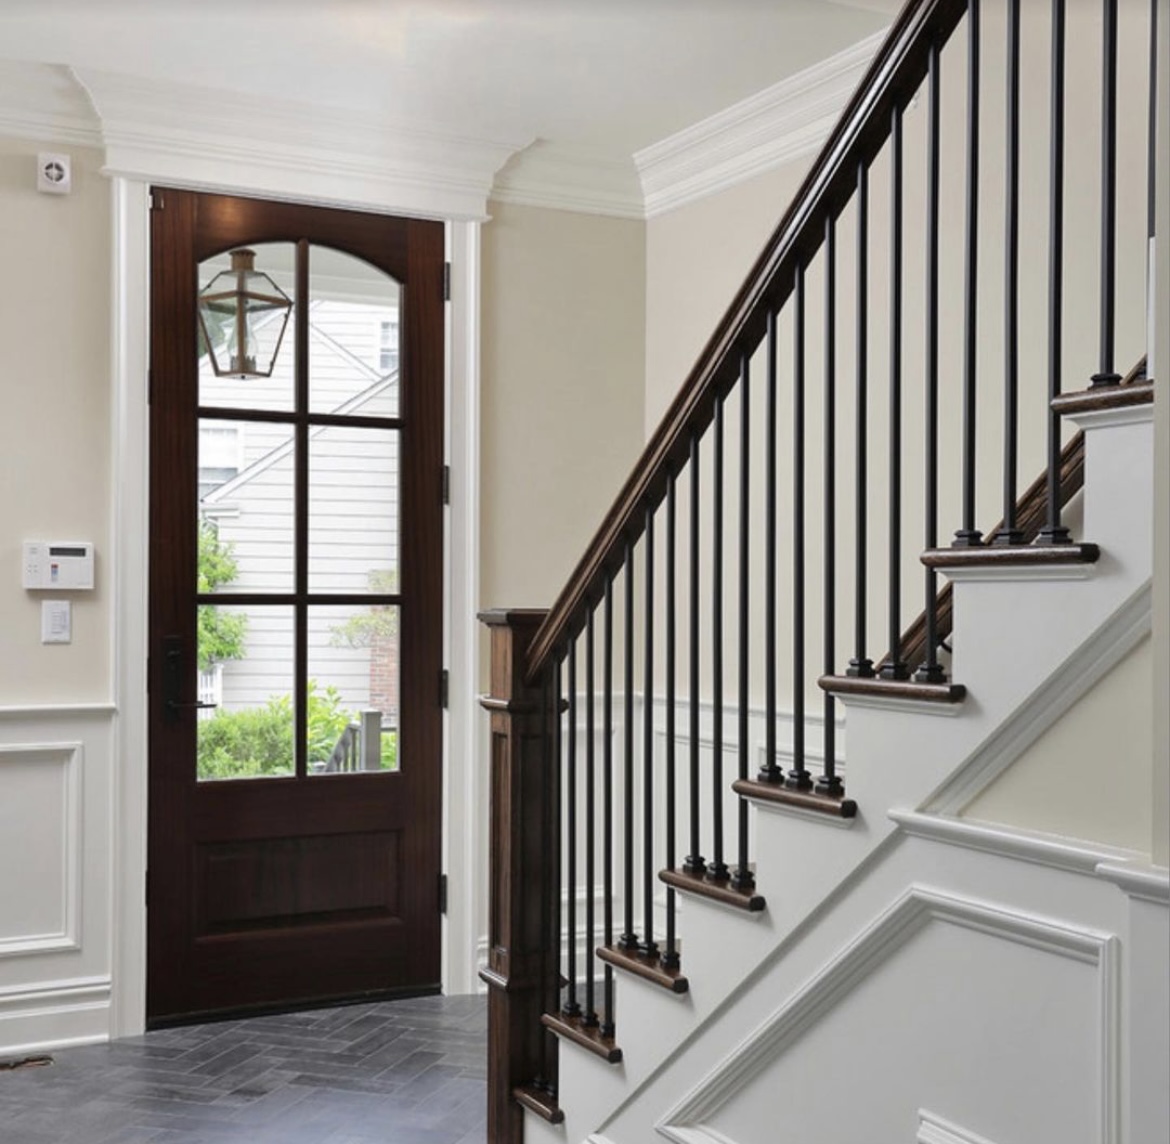 Our Iron Balusters pair perfectly with all of our Non-Plowed Wooden Handrails. 
-
Designer: @rsdesignmanagement
-
#LJSmith #StairExperts #StairInspiration #InteriorDesign #StairDesign #StairRenovation #LoveTheRoom